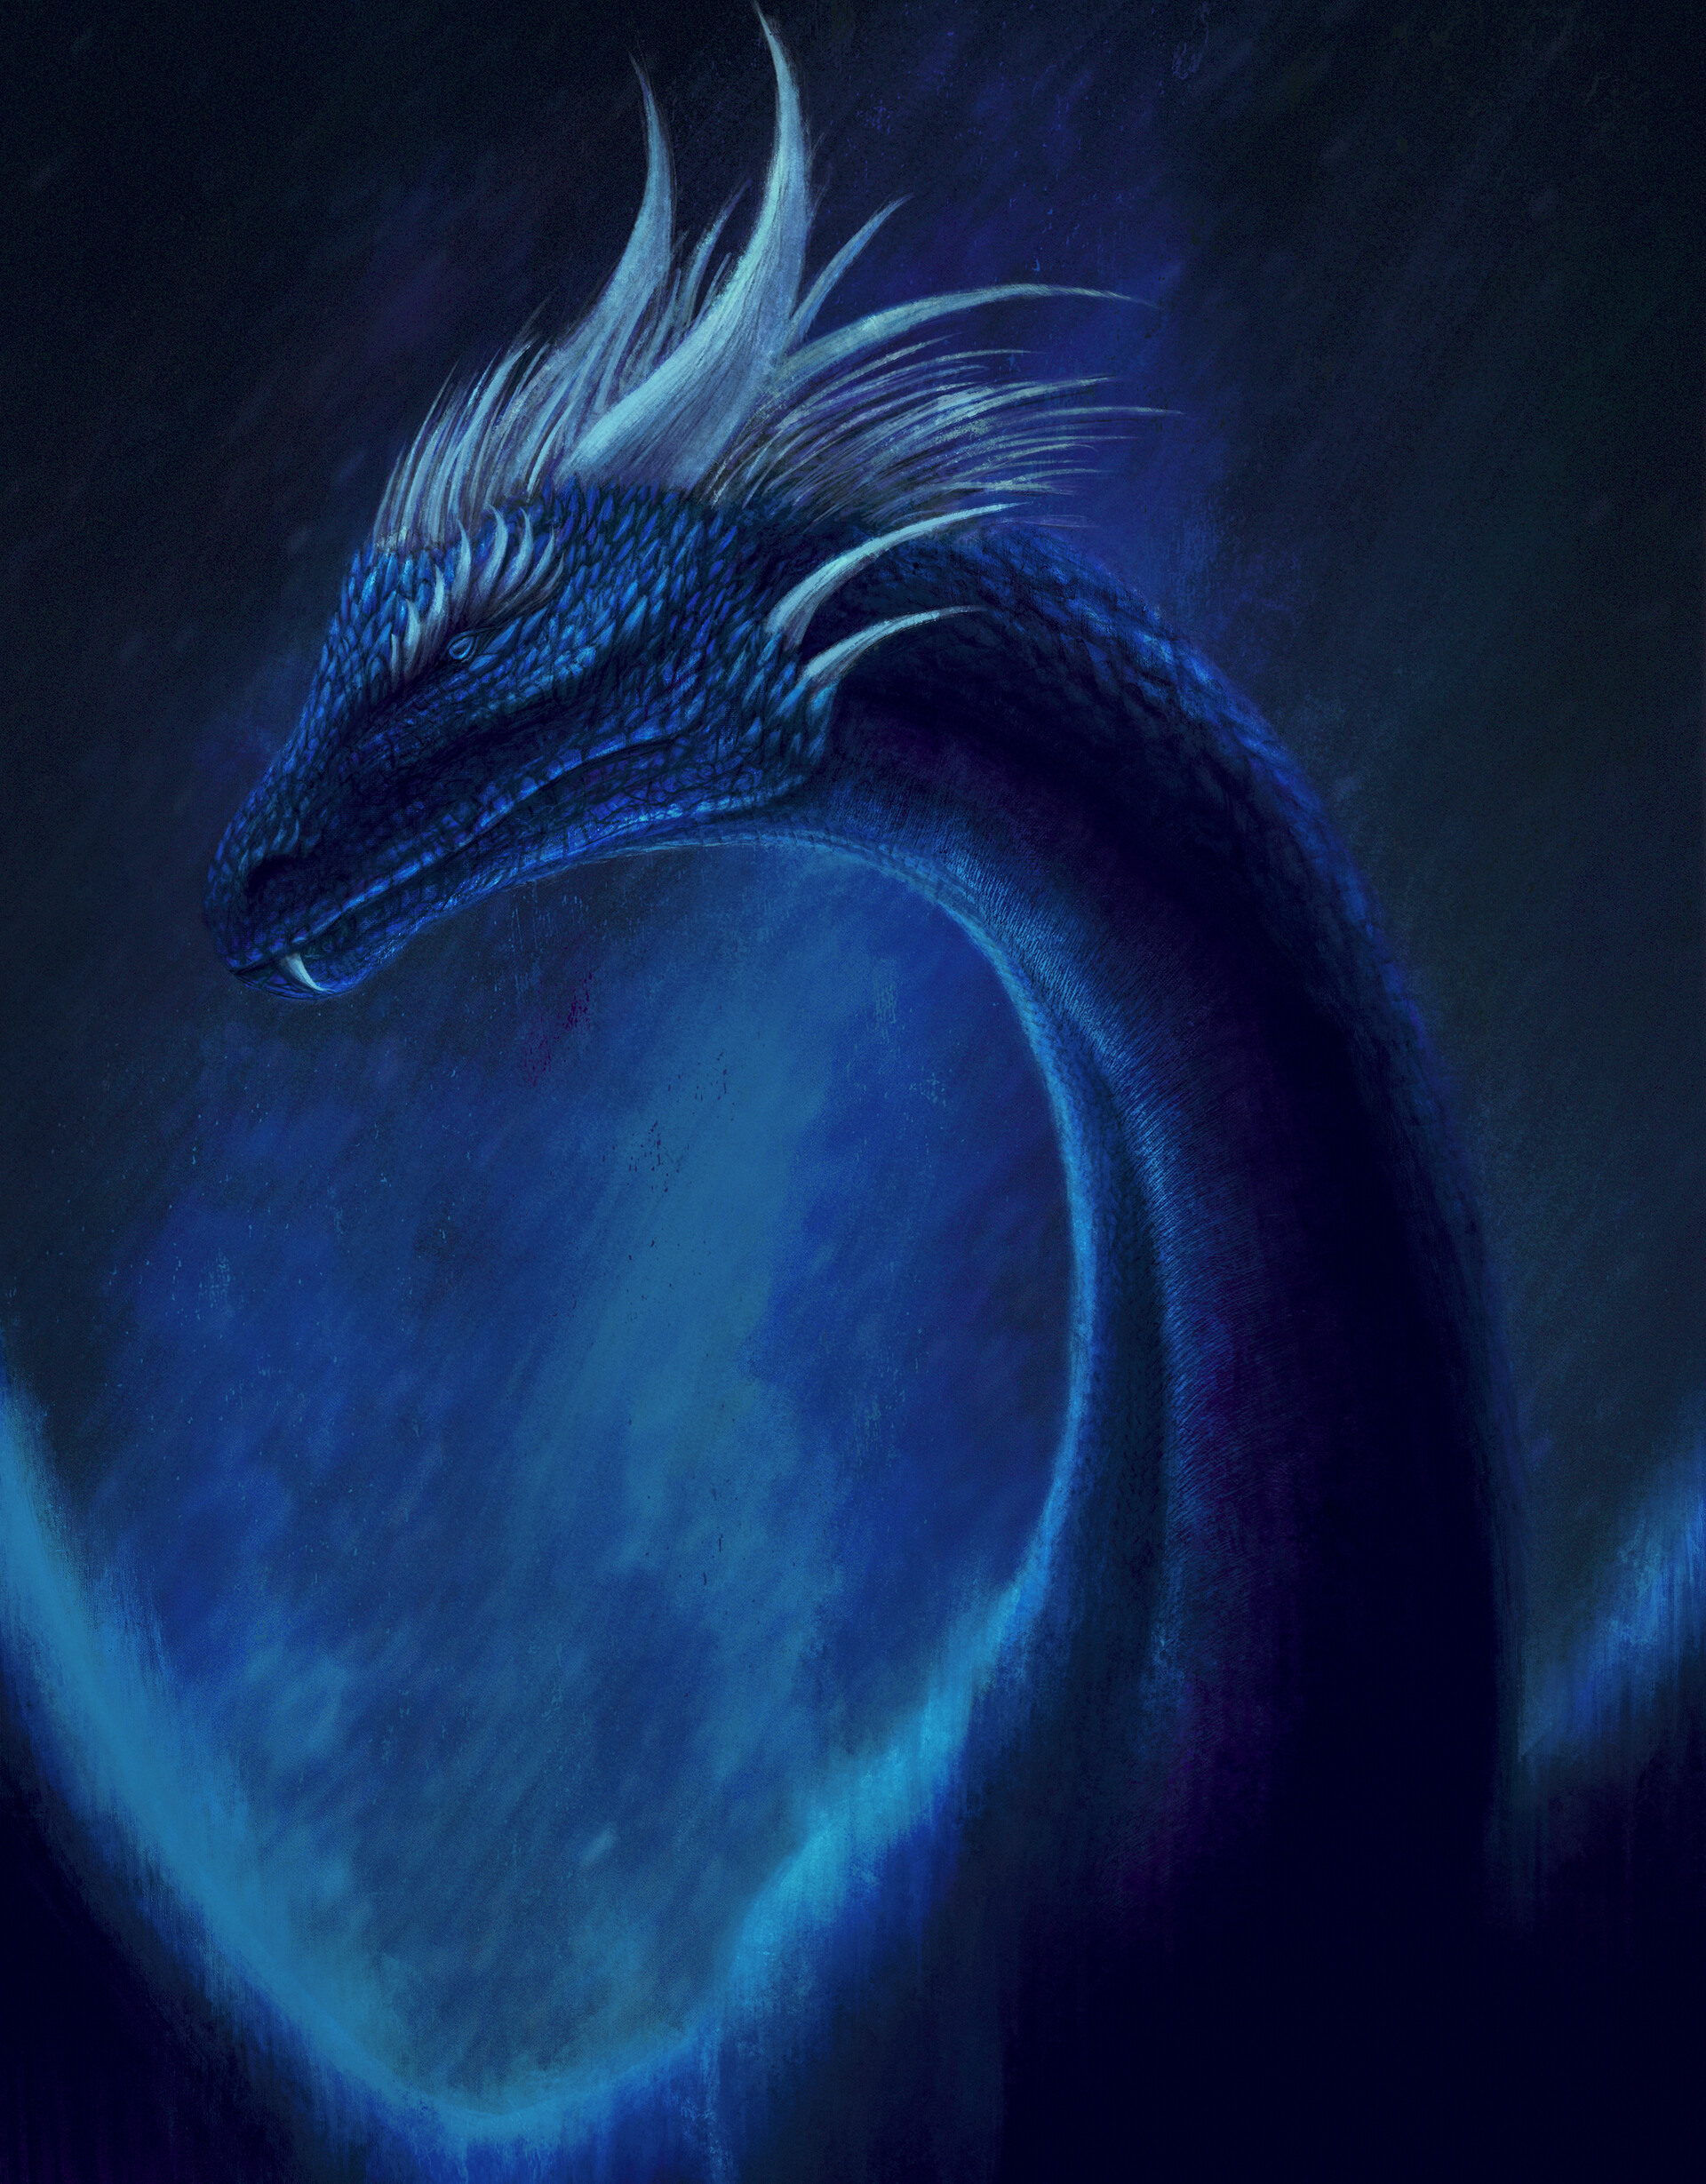 fiction, art, that's incredible, blue, dragon, being, creature Phone Background